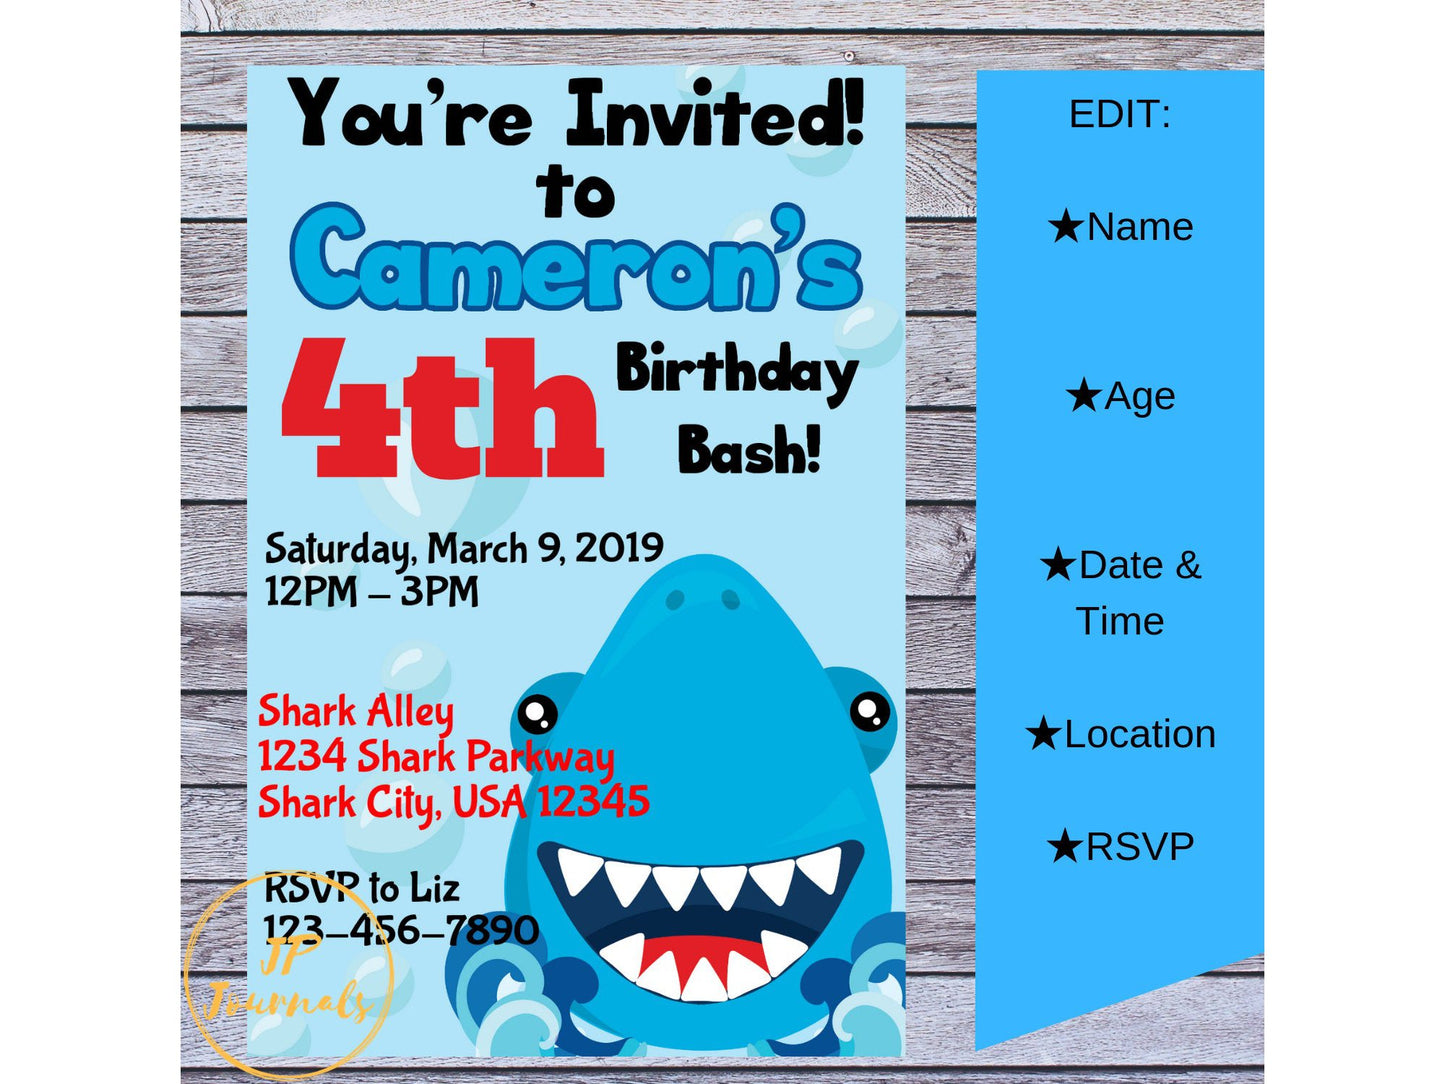 Shark Birthday Party Invitation for Boys and Girls  - DIY Edit Customize Printable Invite - Cool Cute for Kids who Love Sharks! Blue and Red